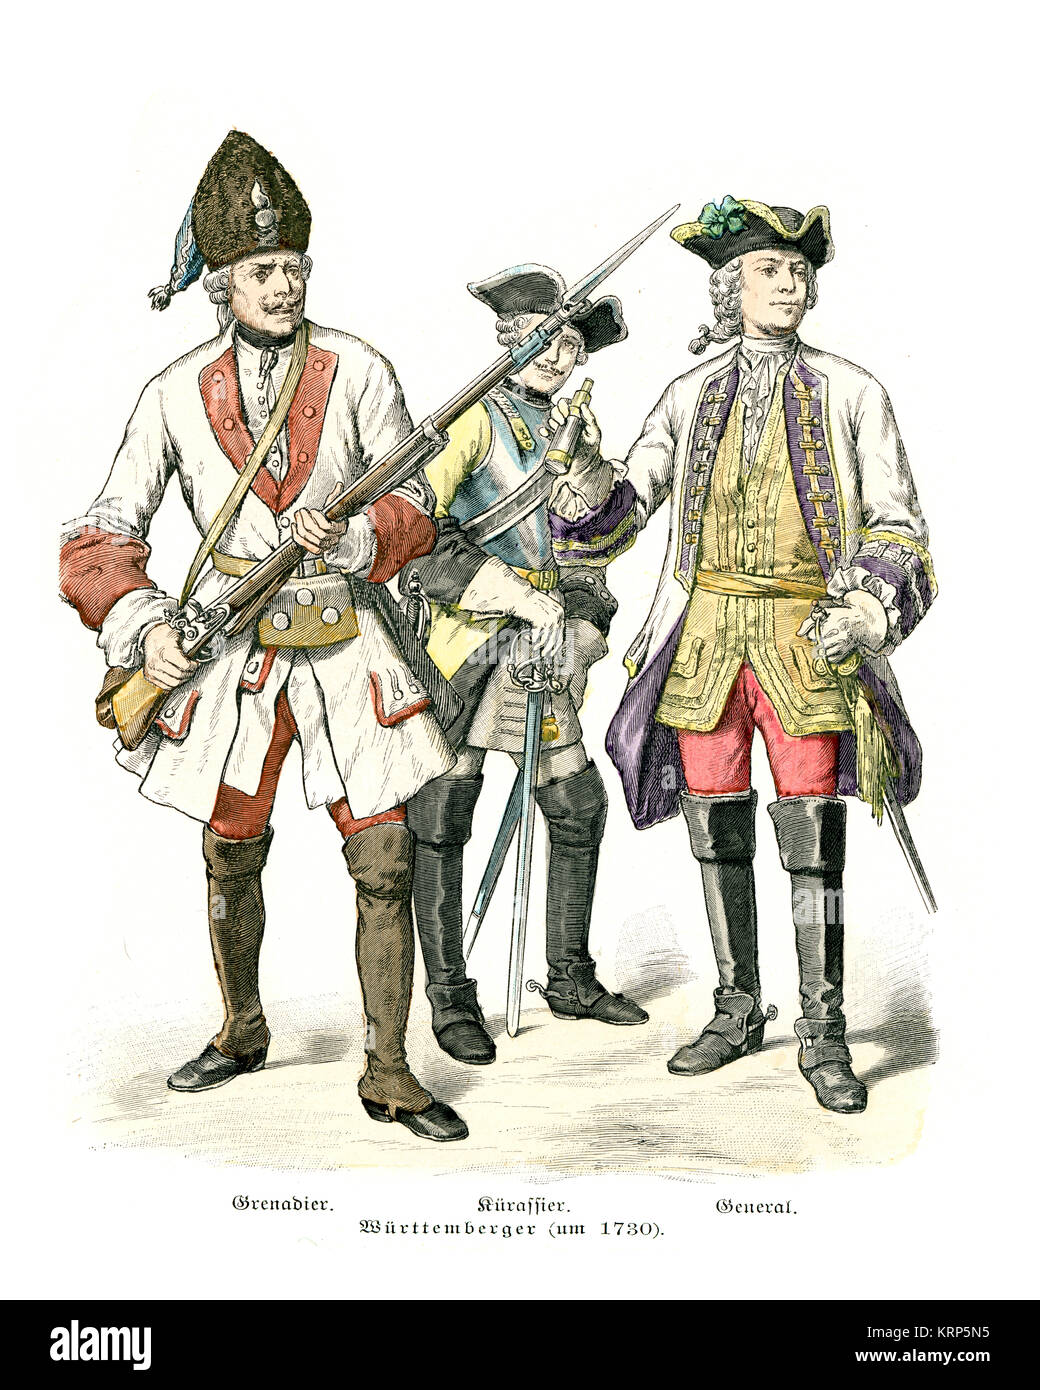 Vintage engraving of Miltary Uniforms 18th Century Wurttemberg, Grenadier, Cuirassier, General. c. 1730 Stock Photo